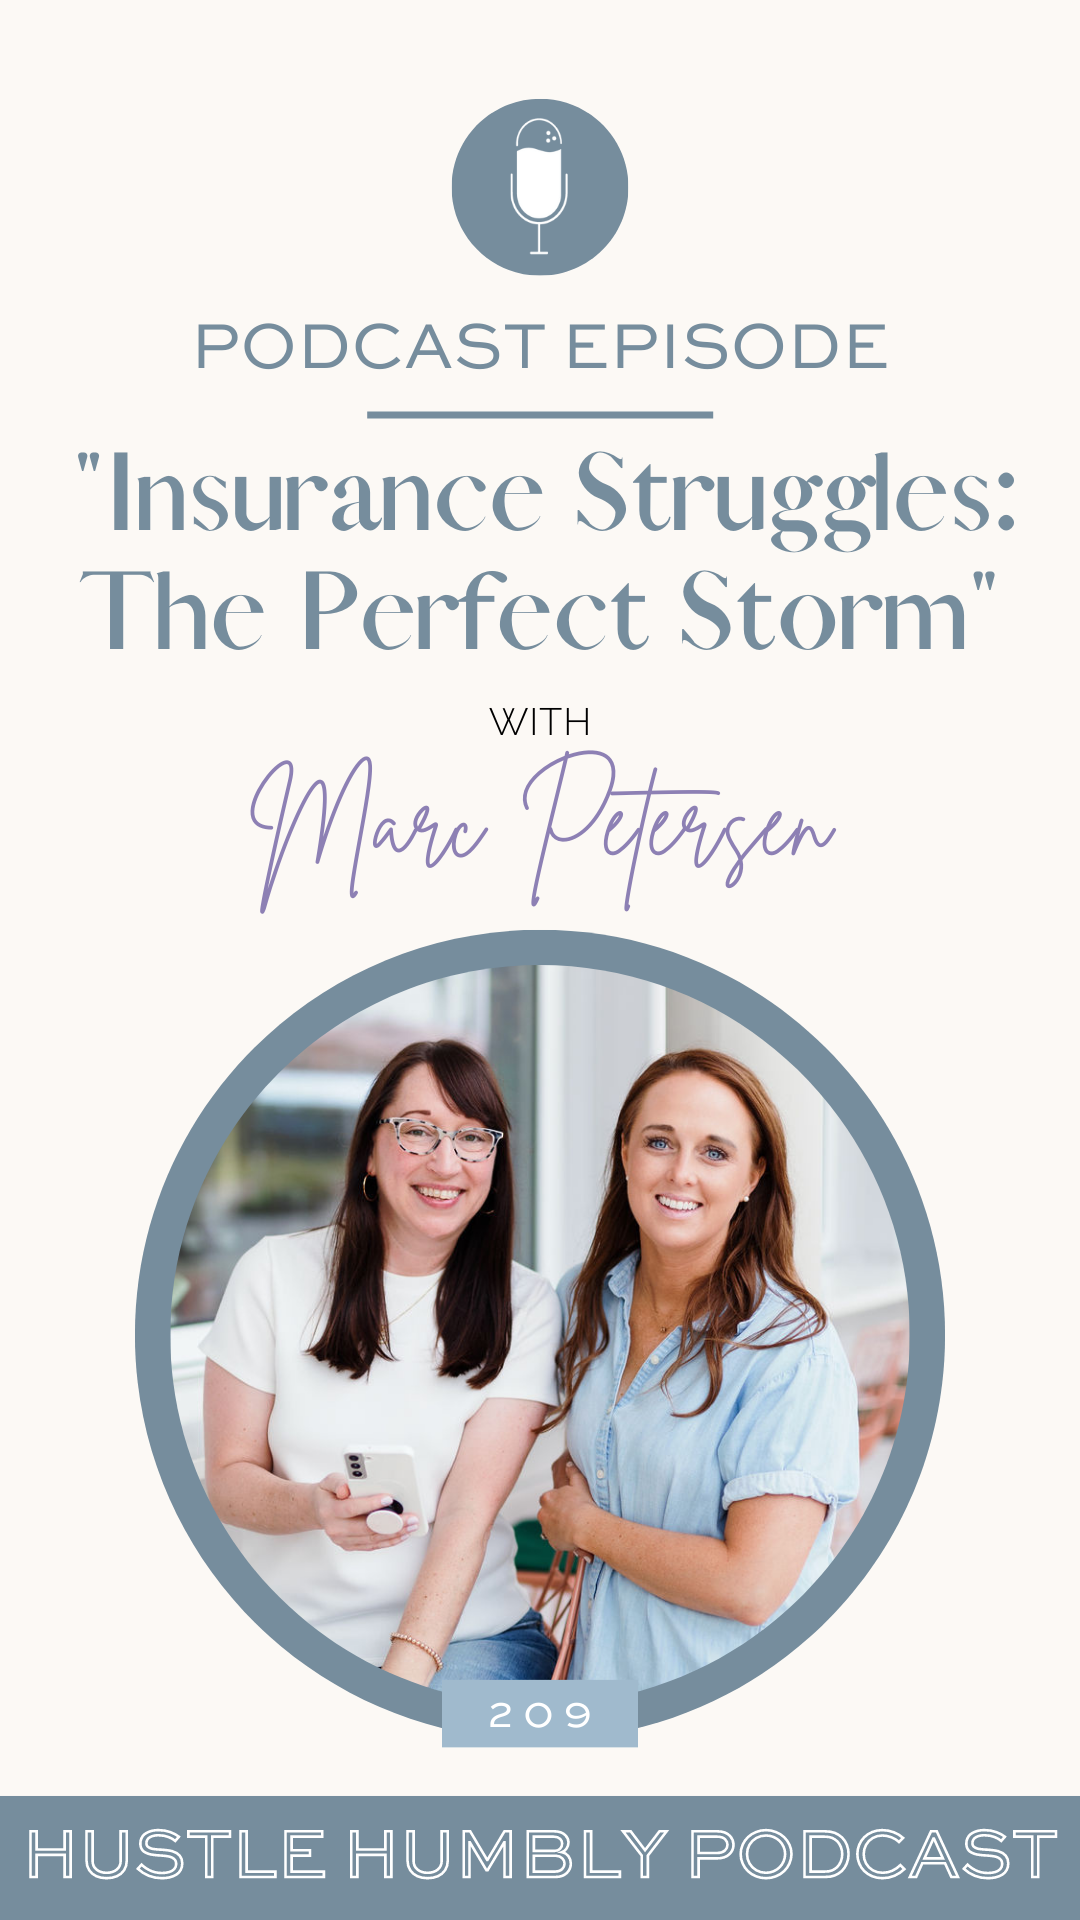 Alissa and Katy, hosts of Hustle Humbly podcast, interviewing Marc Petersen about insurance struggles.